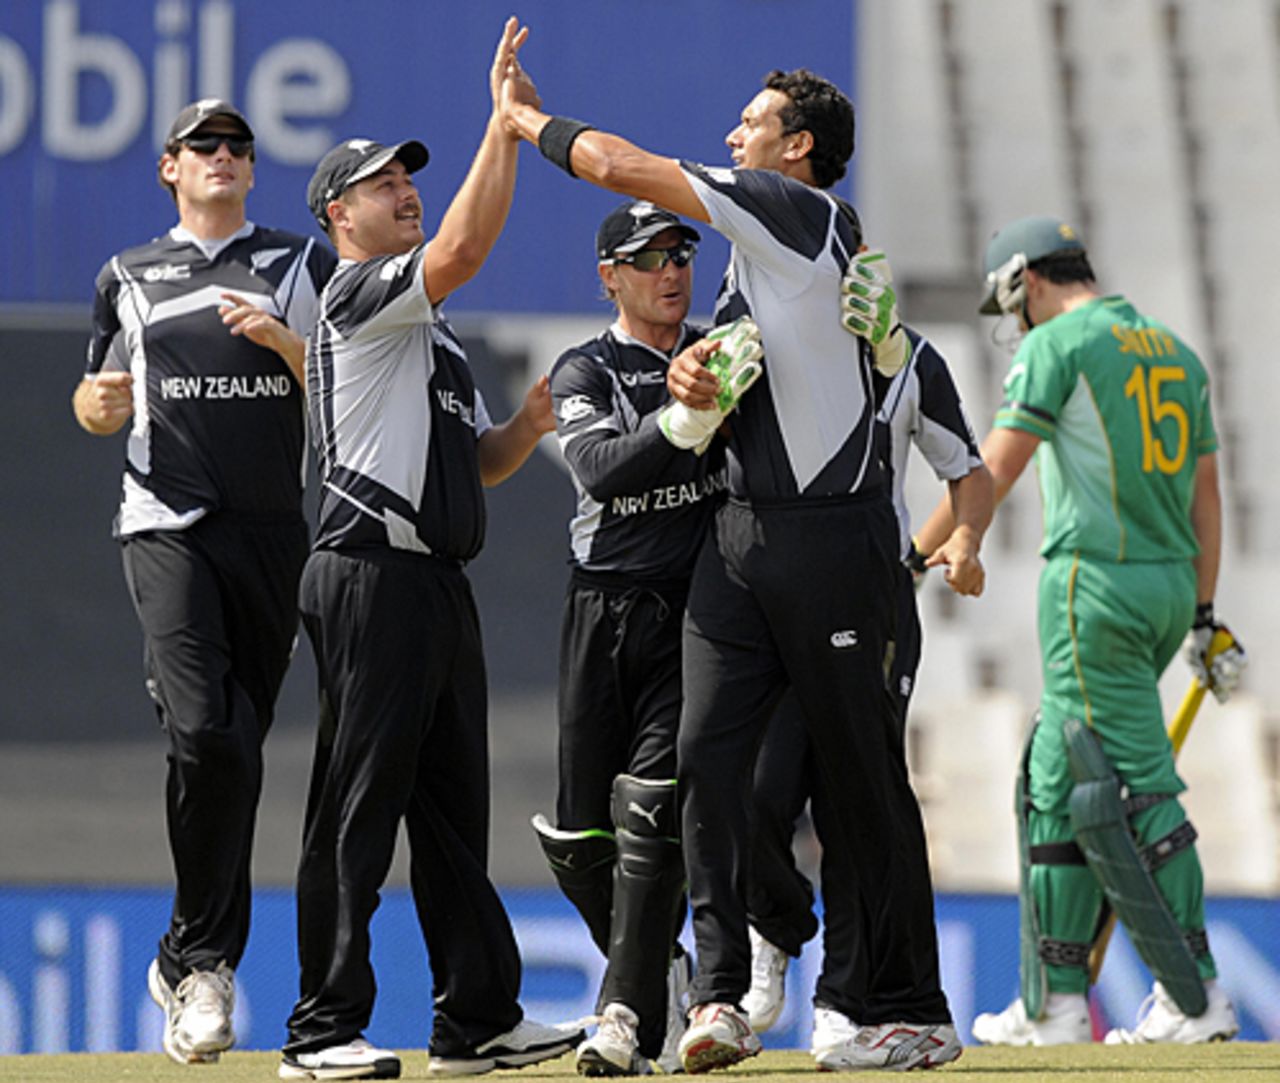 Daryl Tuffey gives New Zealand the first breakthrough, South Africa v New Zealand, Champions Trophy, Group B, Centurion, September 24, 2009